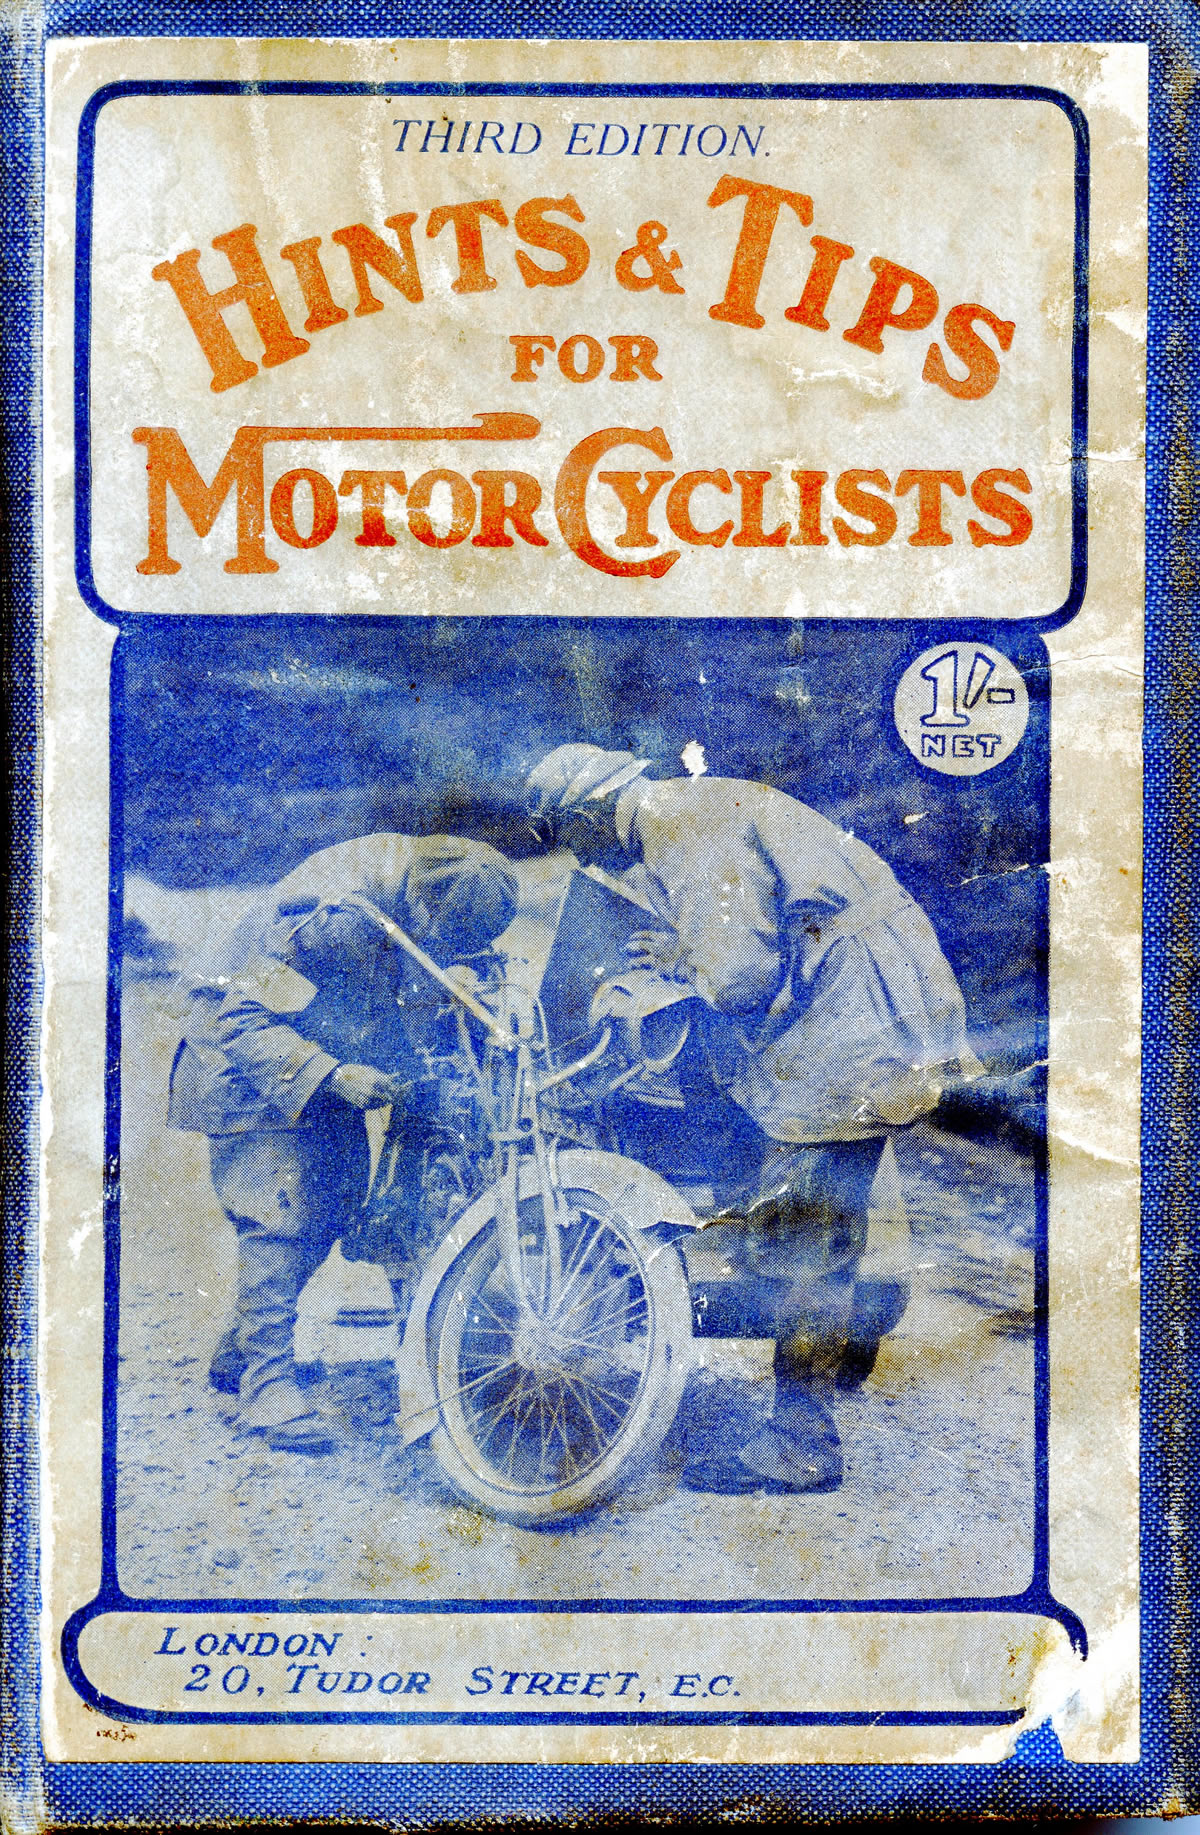 hints and tips for motor cyclists 3rd edition